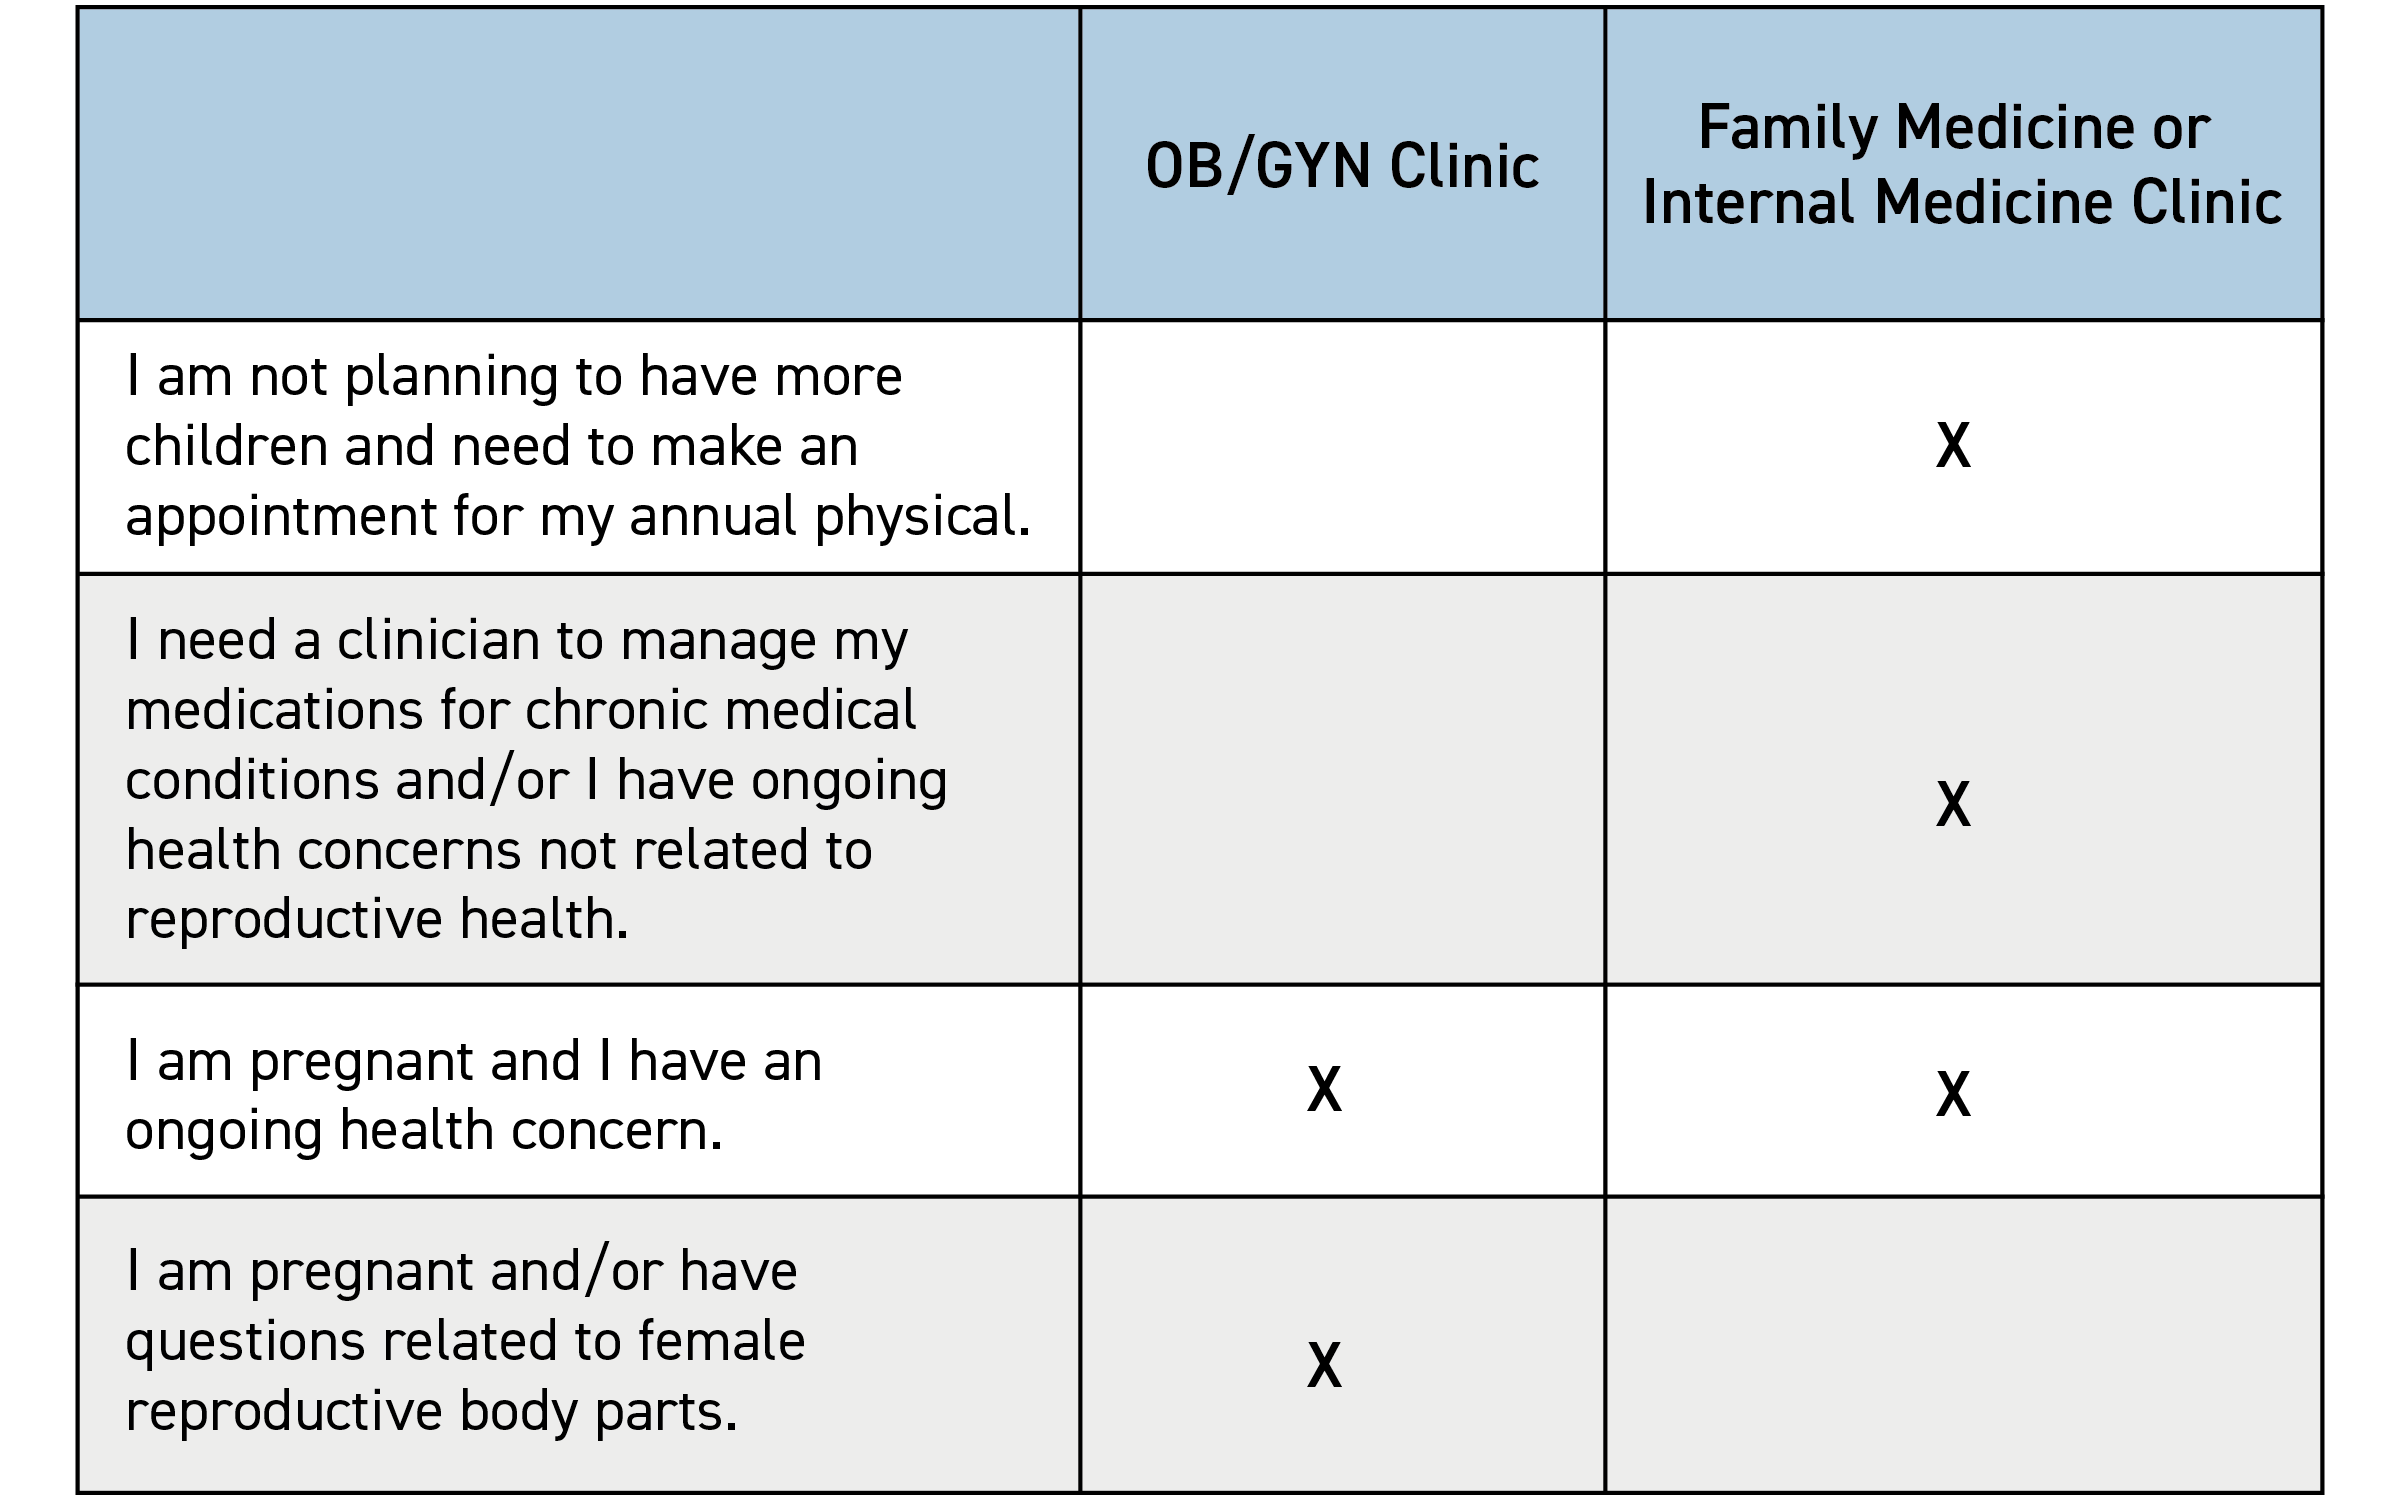 Guidance to decide between an OB/GYN clinic and family medicine/internal medicine clinic visit.